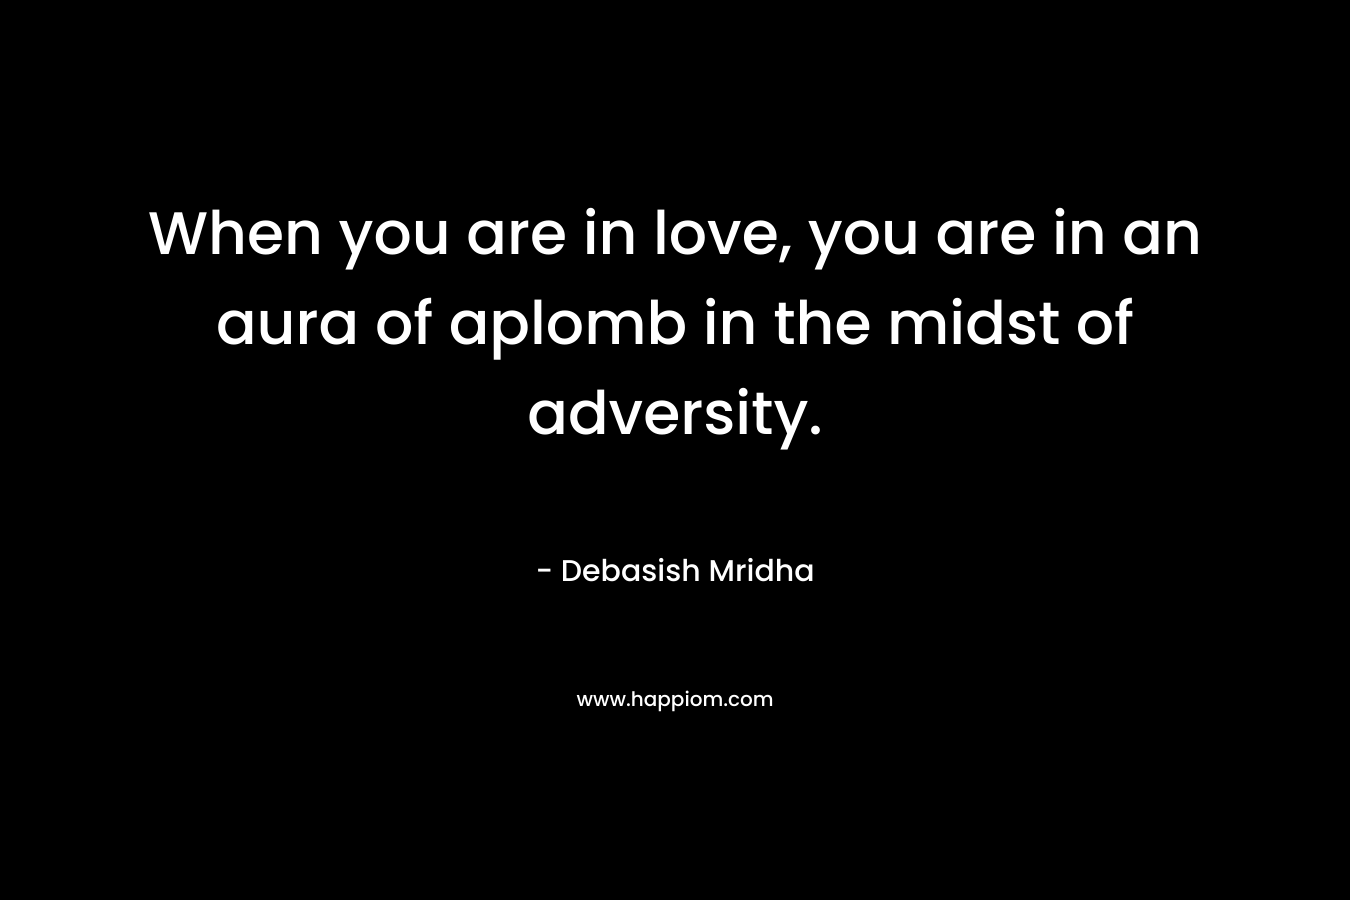 When you are in love, you are in an aura of aplomb in the midst of adversity. – Debasish Mridha